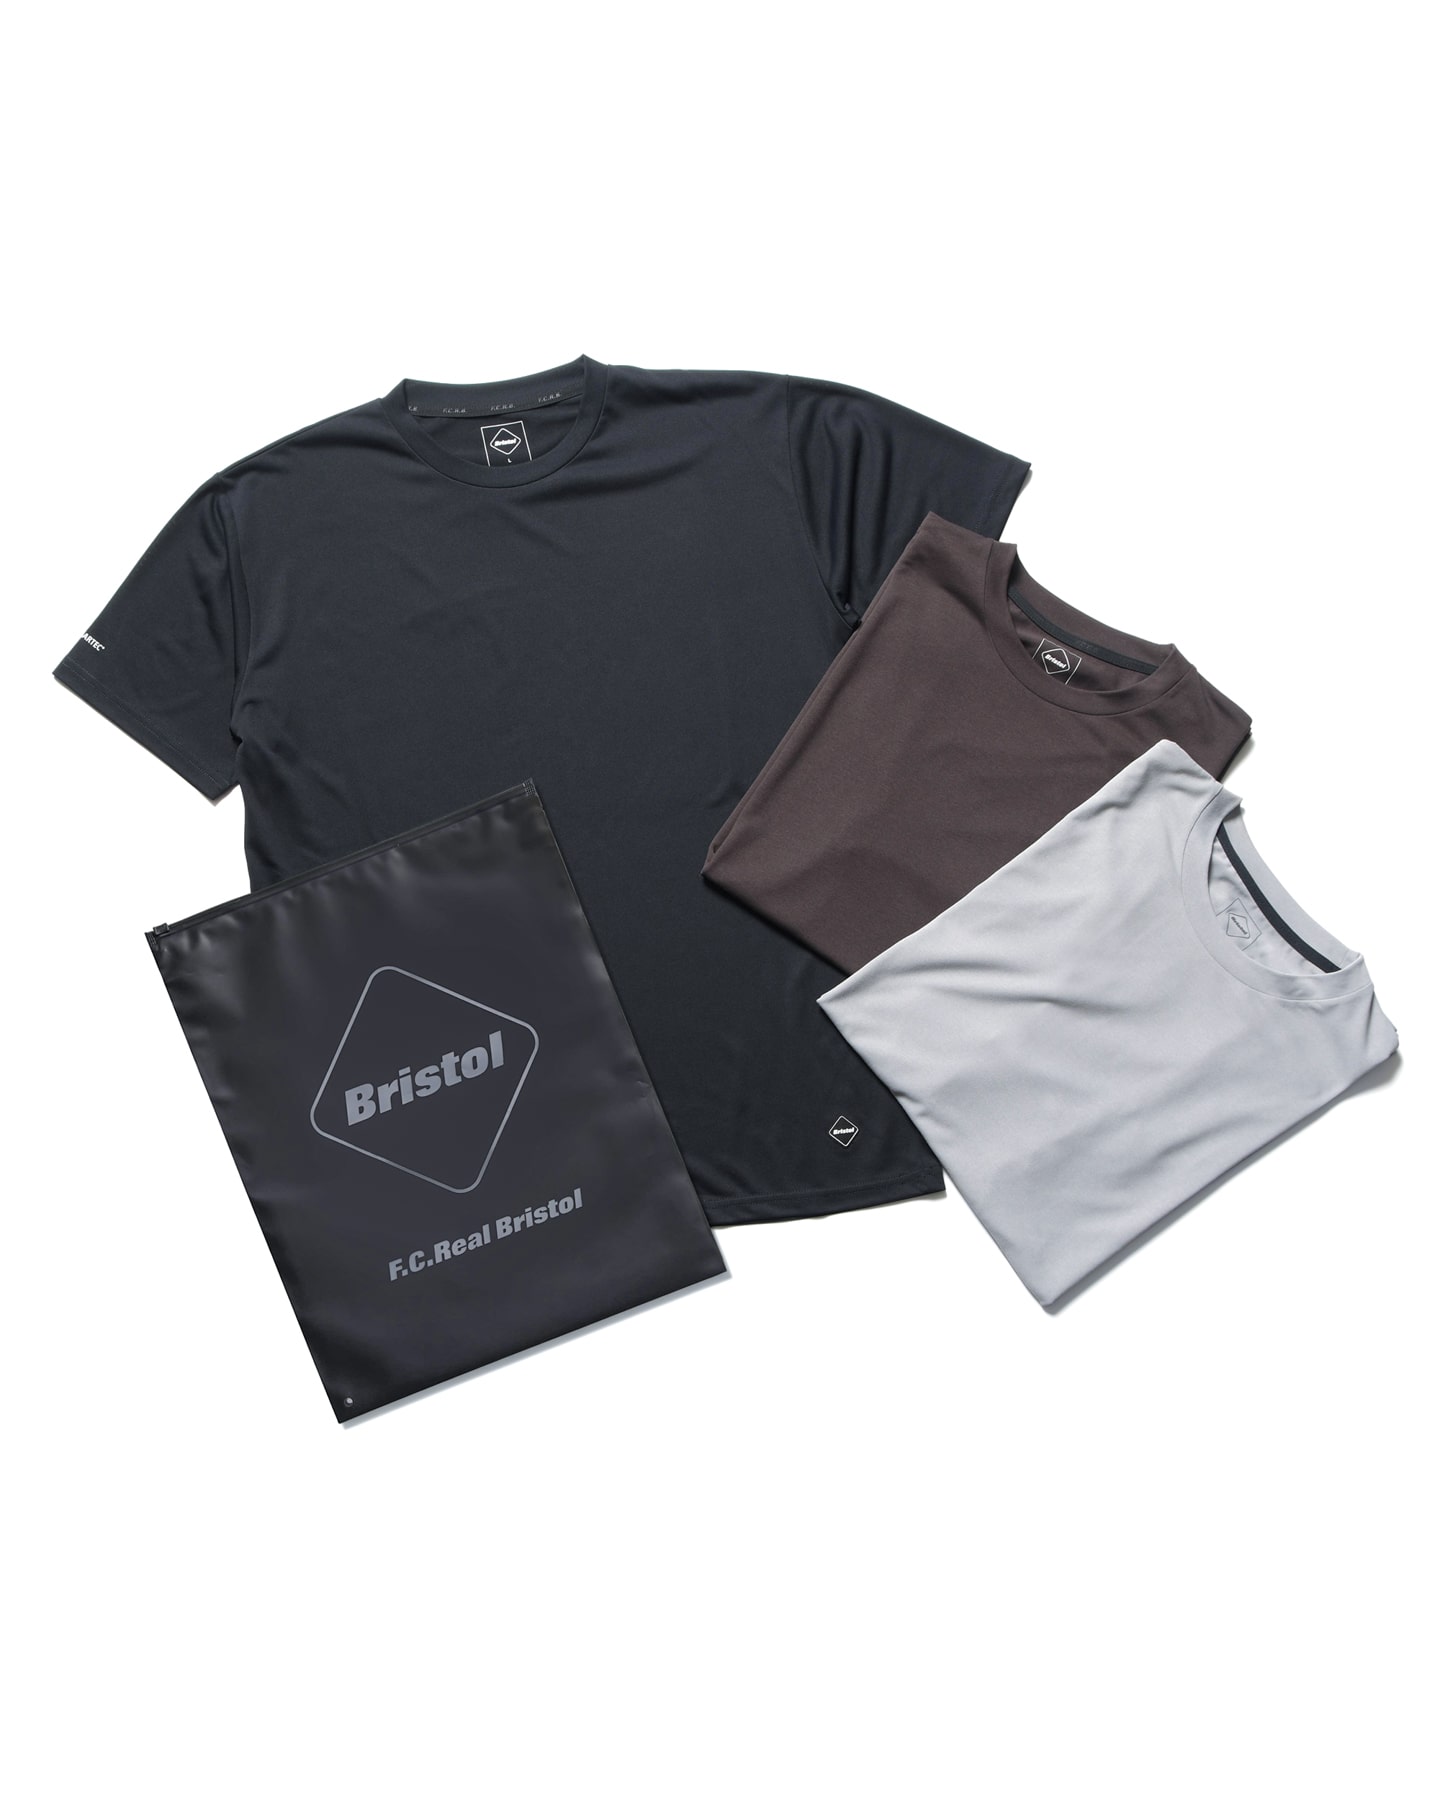 SOPH. | POLARTEC POWER DRY 3PACK TEE(M 3 COLOR):